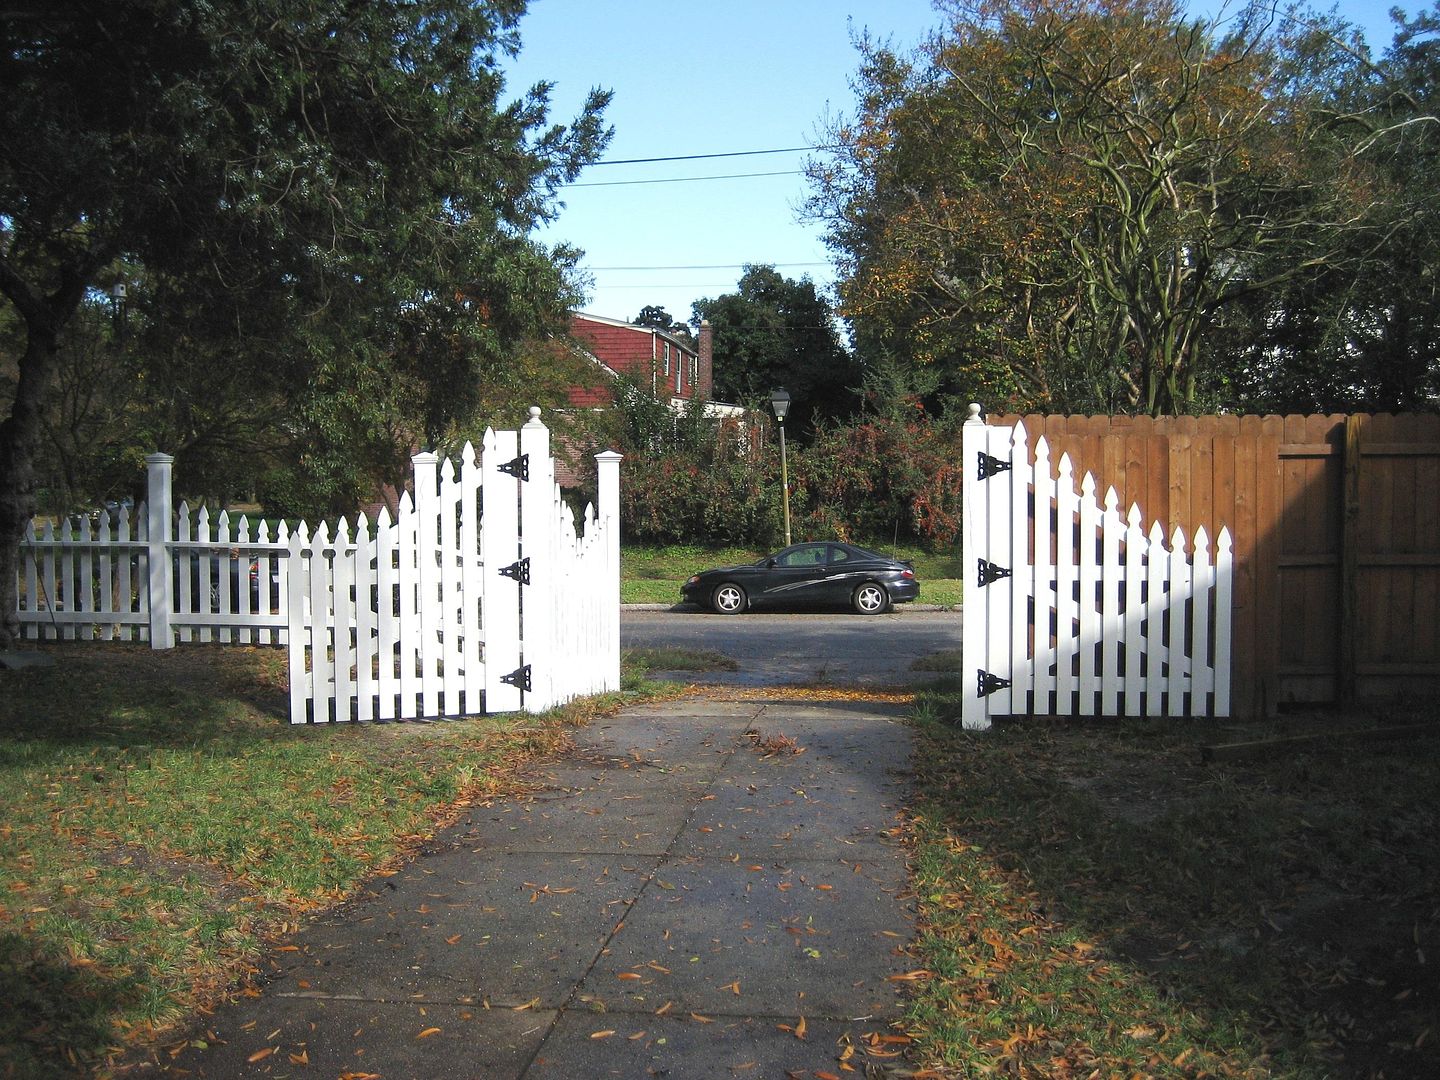 And David built this custom fence around our yard. 